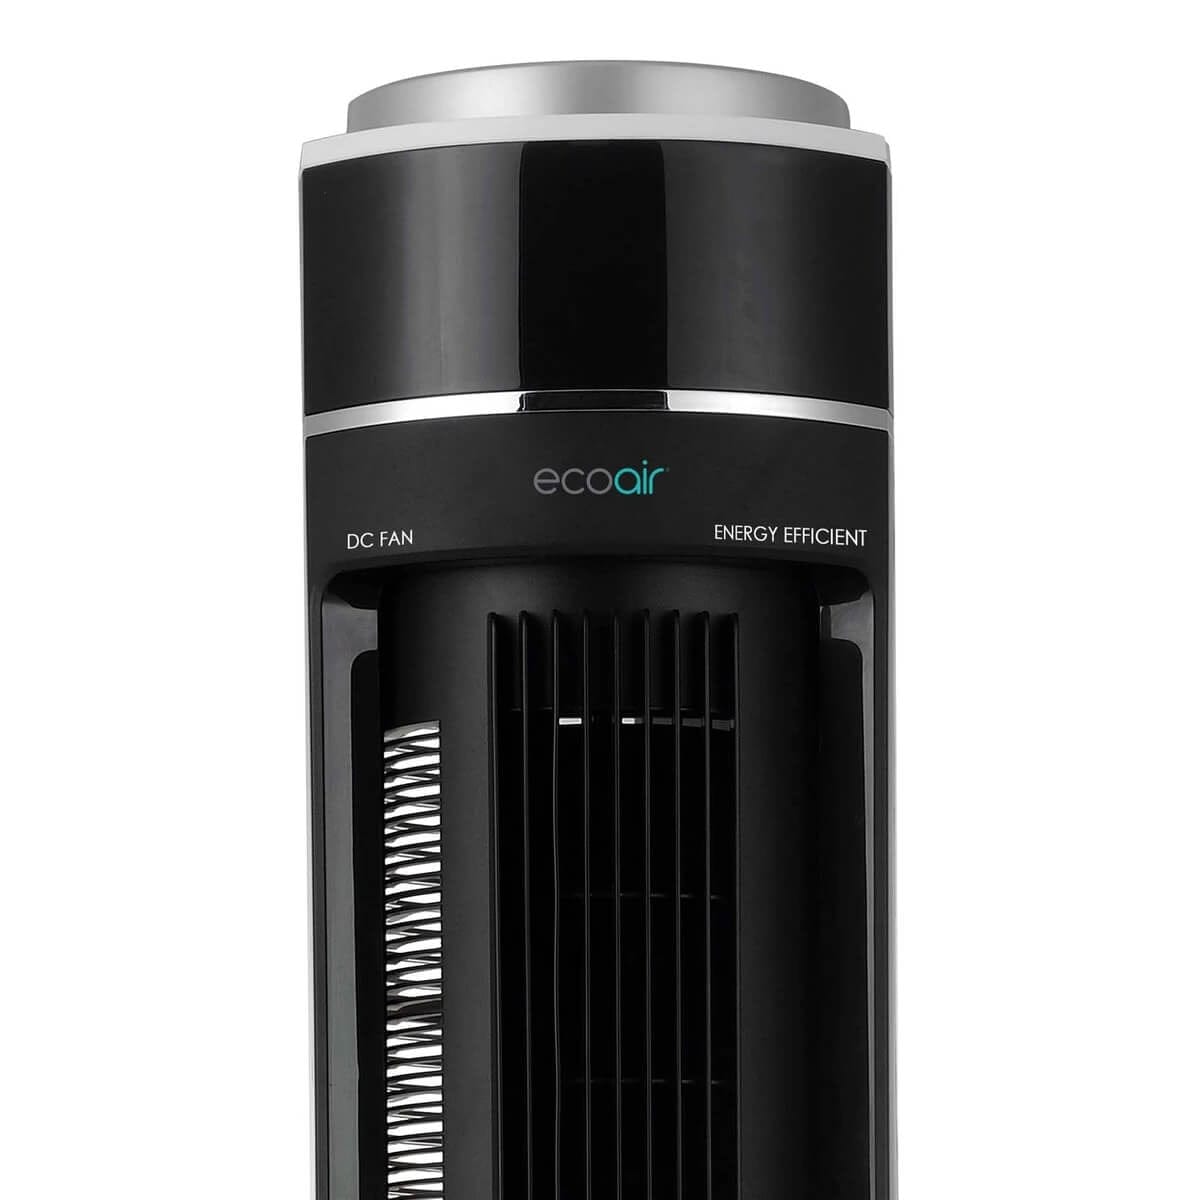 EcoAir Halo - Low Energy DC Tower Fan 2.8 Watts-hour | 12 Speeds | DC Motor | 0.5-12 Hour Timer | Digital Control Panel | Remote Control | Oscillation Function - Atlantic Electrics